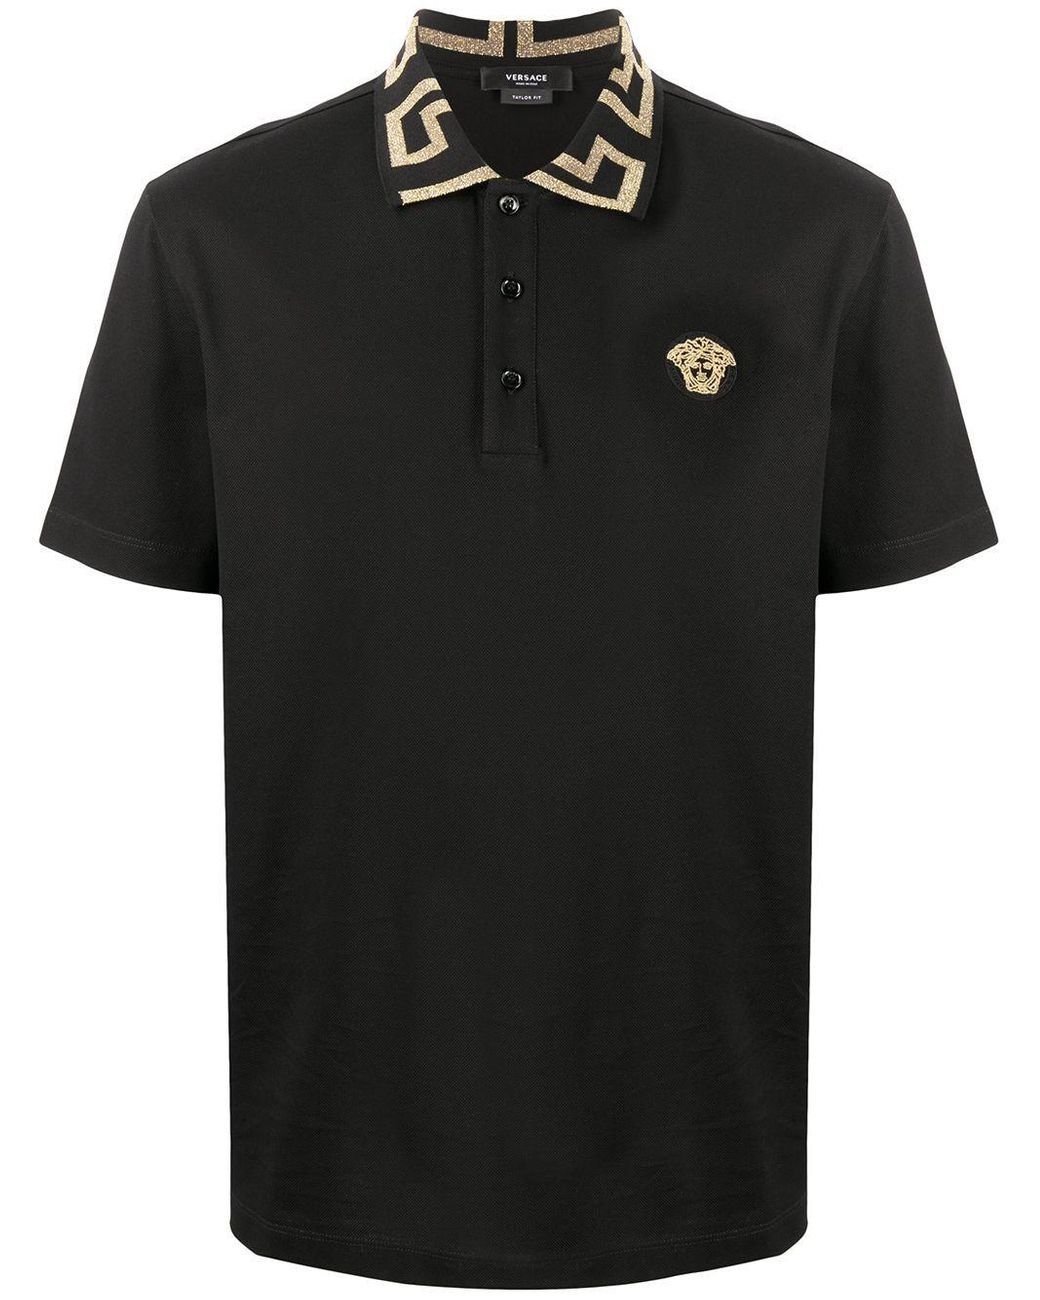 Versace Cotton Polo Shirt in Black for Men - Save 9% - Lyst